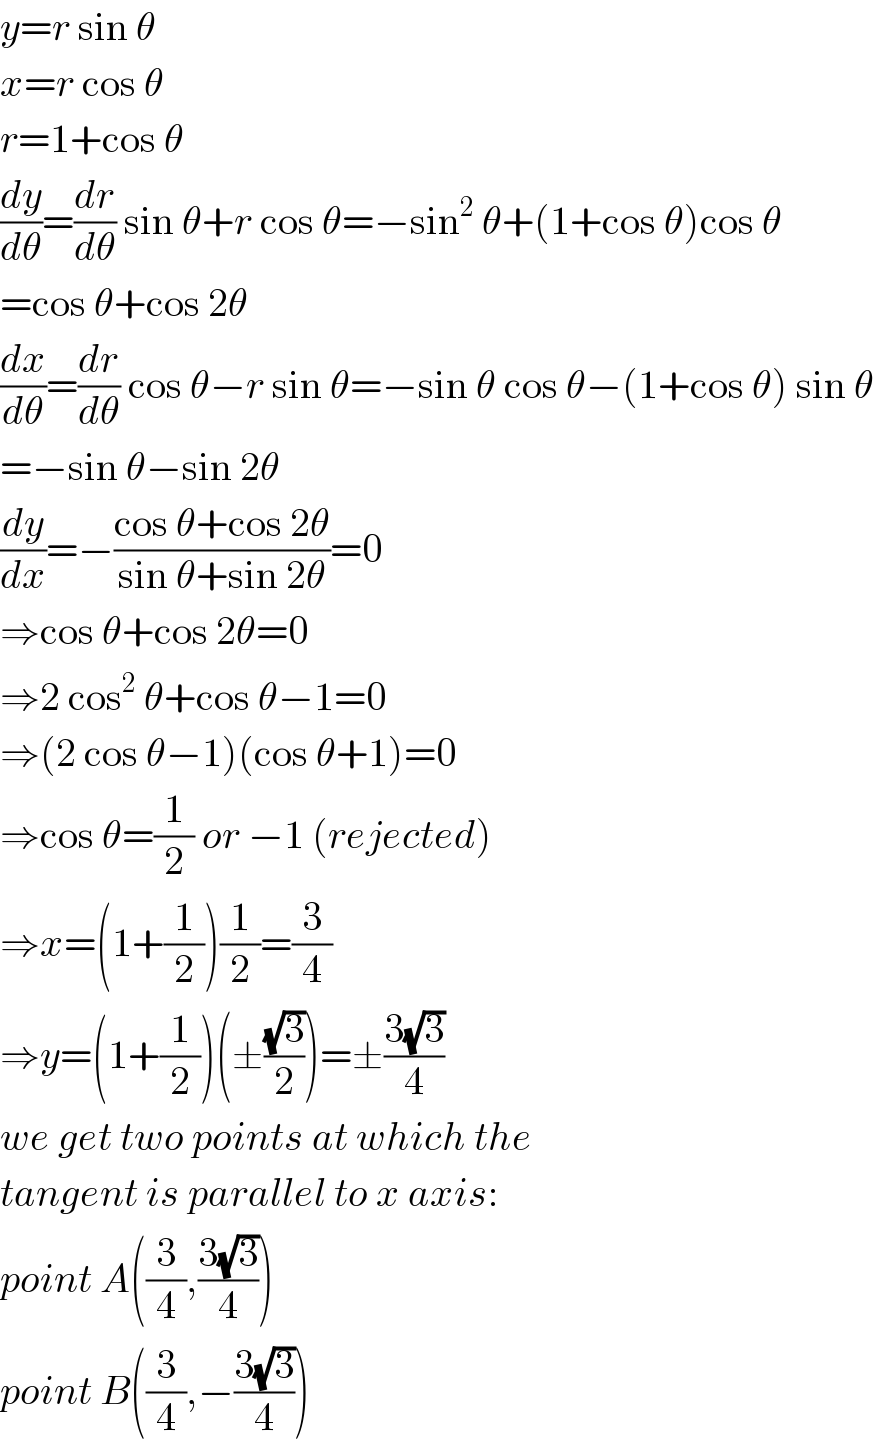 y=r sin θ  x=r cos θ  r=1+cos θ  (dy/dθ)=(dr/dθ) sin θ+r cos θ=−sin^2  θ+(1+cos θ)cos θ  =cos θ+cos 2θ  (dx/dθ)=(dr/dθ) cos θ−r sin θ=−sin θ cos θ−(1+cos θ) sin θ  =−sin θ−sin 2θ  (dy/dx)=−((cos θ+cos 2θ)/(sin θ+sin 2θ))=0  ⇒cos θ+cos 2θ=0  ⇒2 cos^2  θ+cos θ−1=0  ⇒(2 cos θ−1)(cos θ+1)=0  ⇒cos θ=(1/2) or −1 (rejected)  ⇒x=(1+(1/2))(1/2)=(3/4)  ⇒y=(1+(1/2))(±((√3)/2))=±((3(√3))/4)  we get two points at which the  tangent is parallel to x axis:  point A((3/4),((3(√3))/4))  point B((3/4),−((3(√3))/4))  